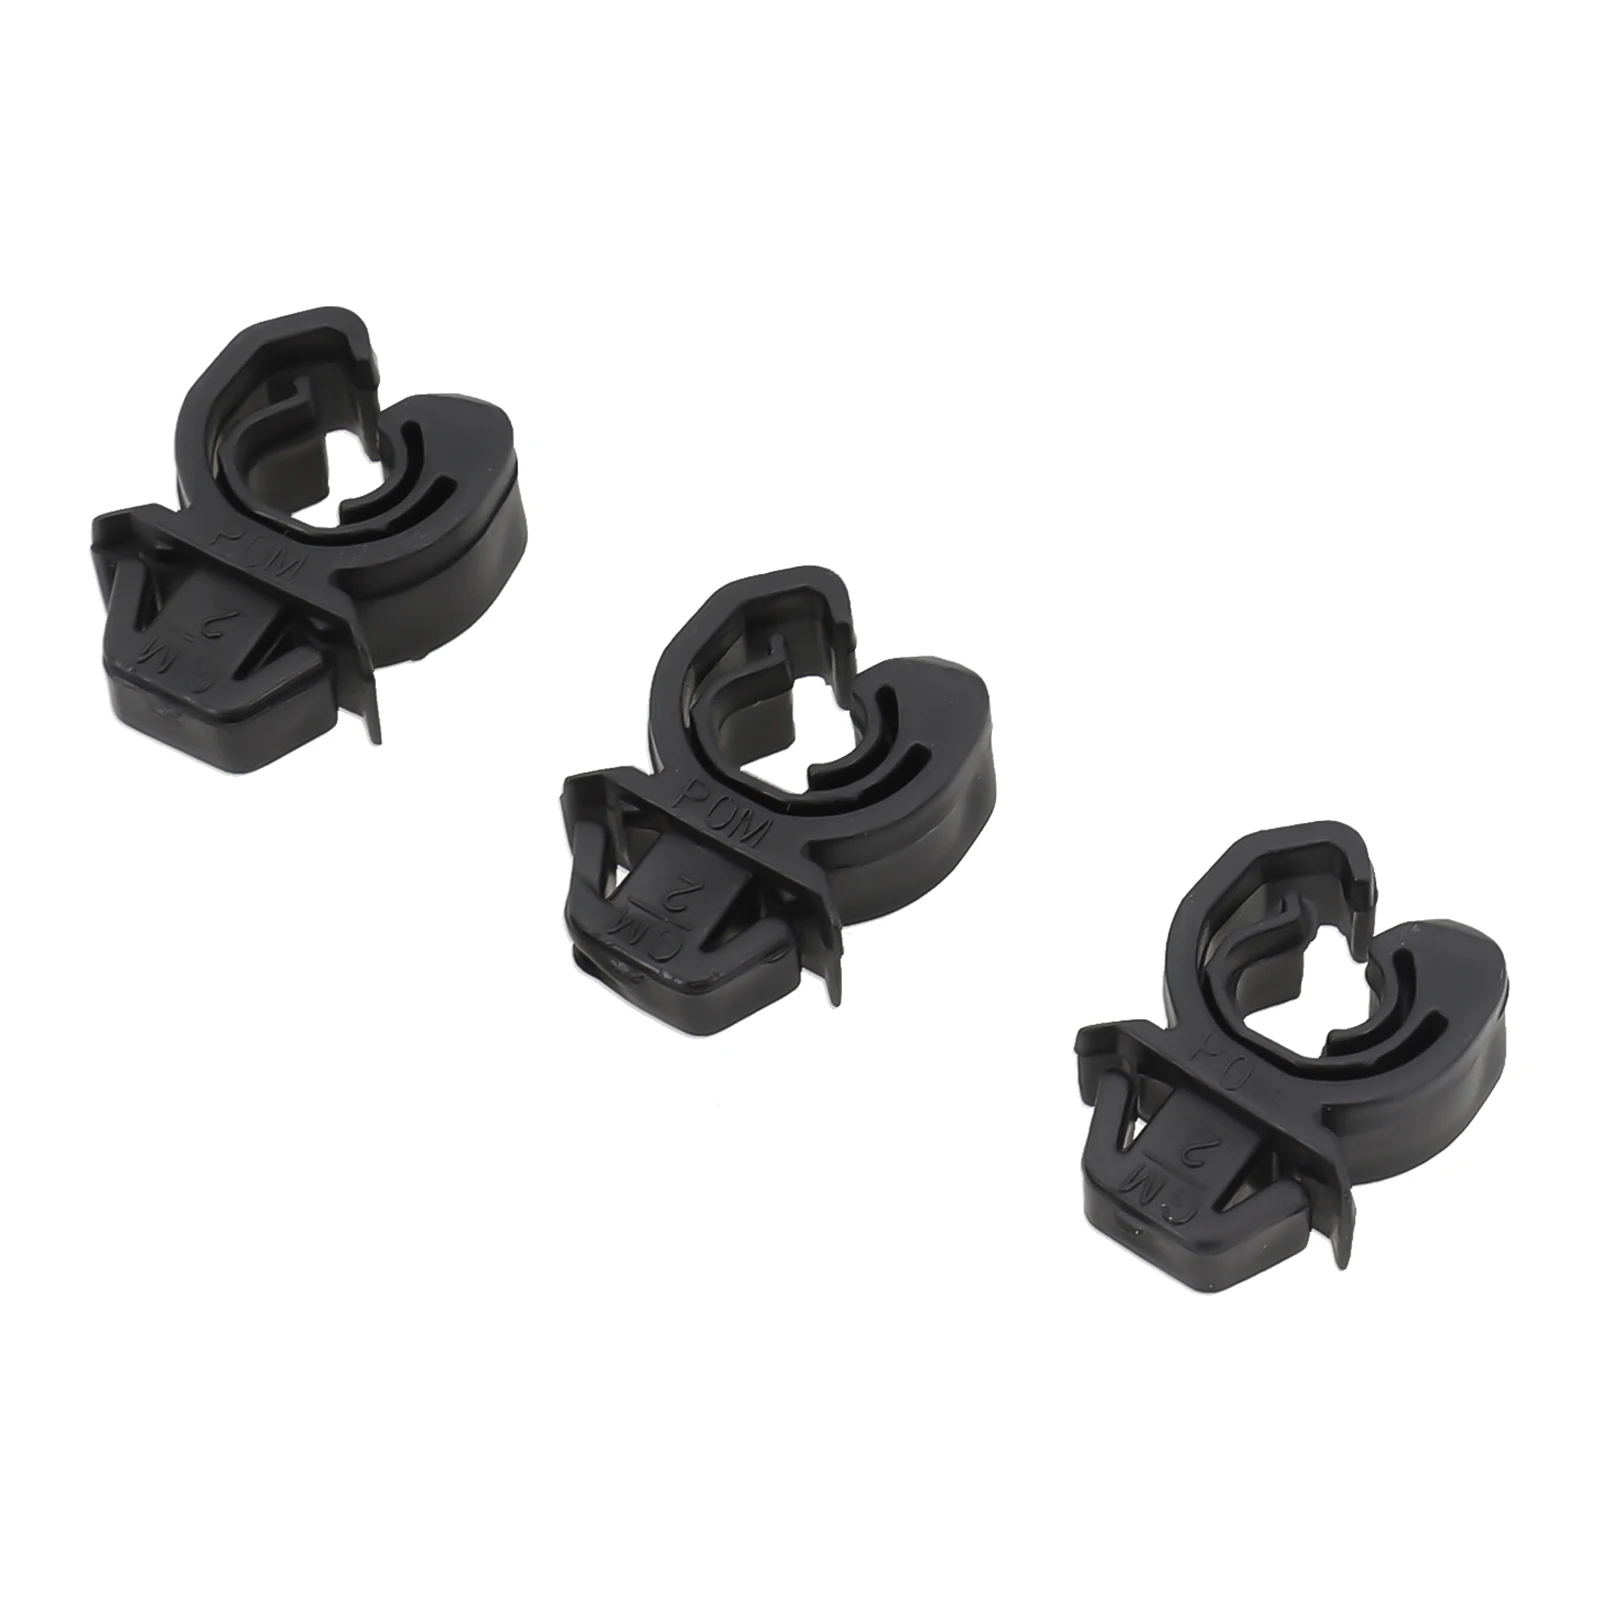 

Improve the Functionality of Your For Vauxhall Astra G Zafira A Ampera with 5pcs Hood Bonnet Rod Clip Clamp Holder